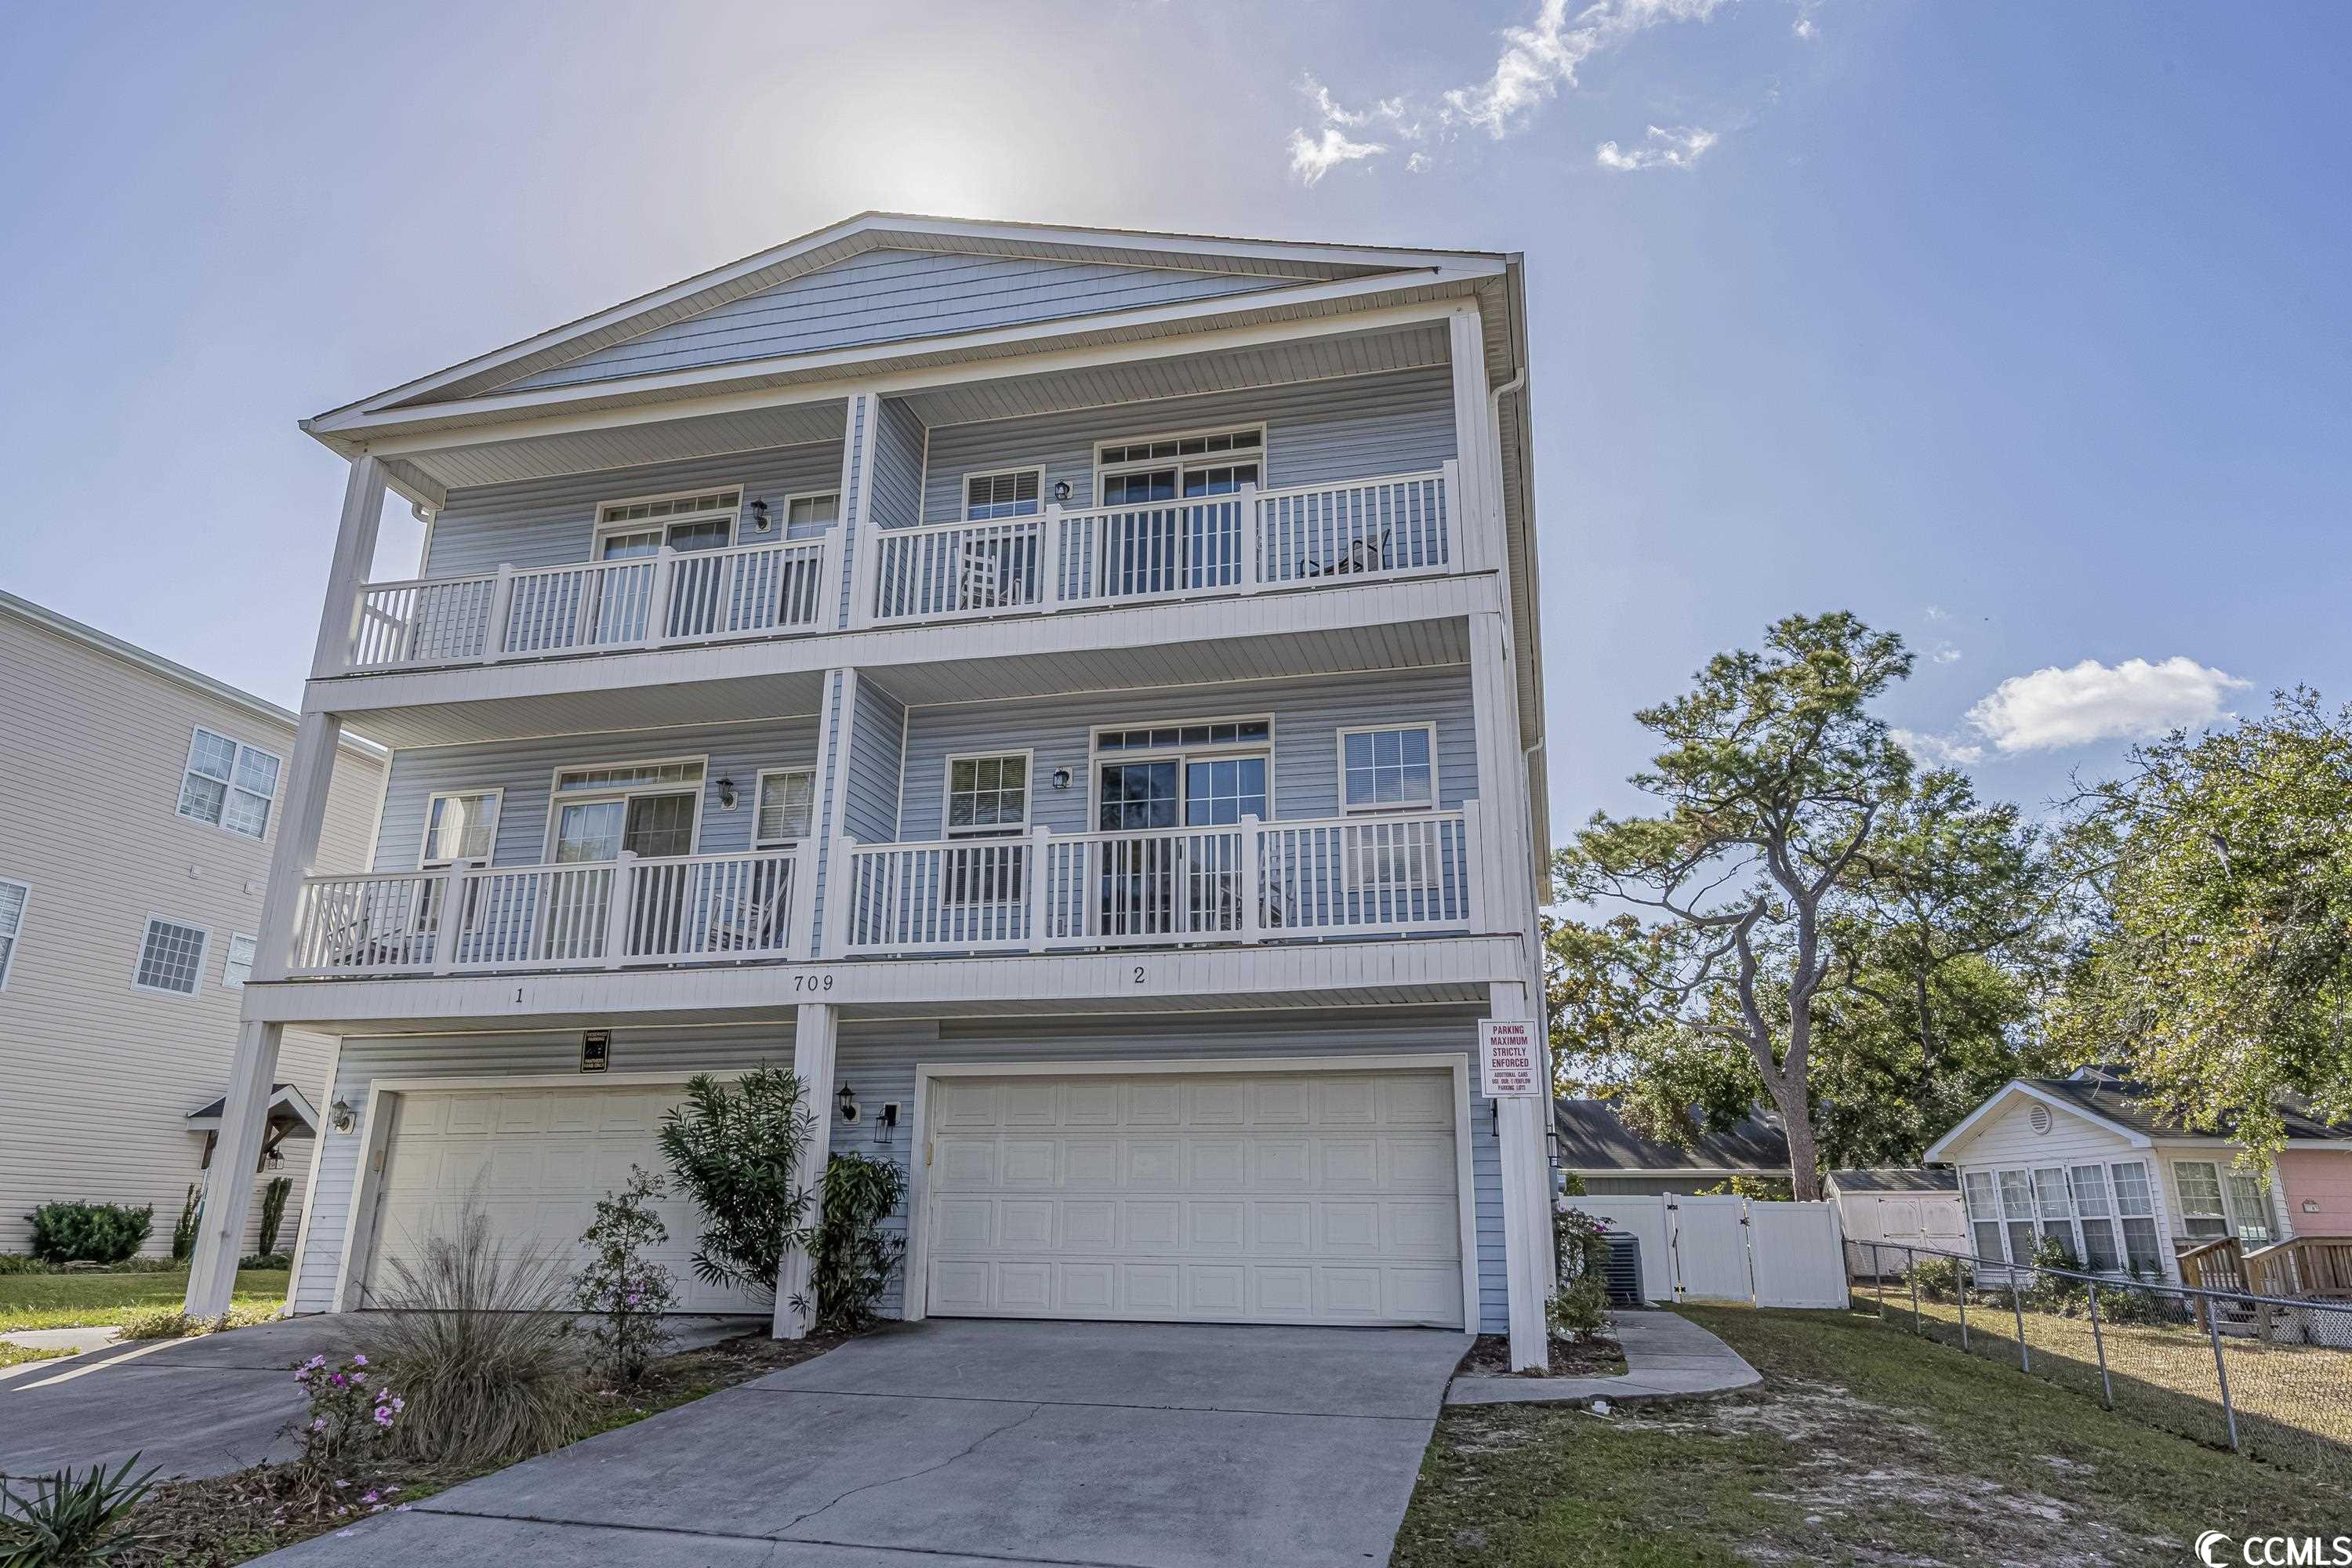 709 37th Ave. S North Myrtle Beach, SC 29582